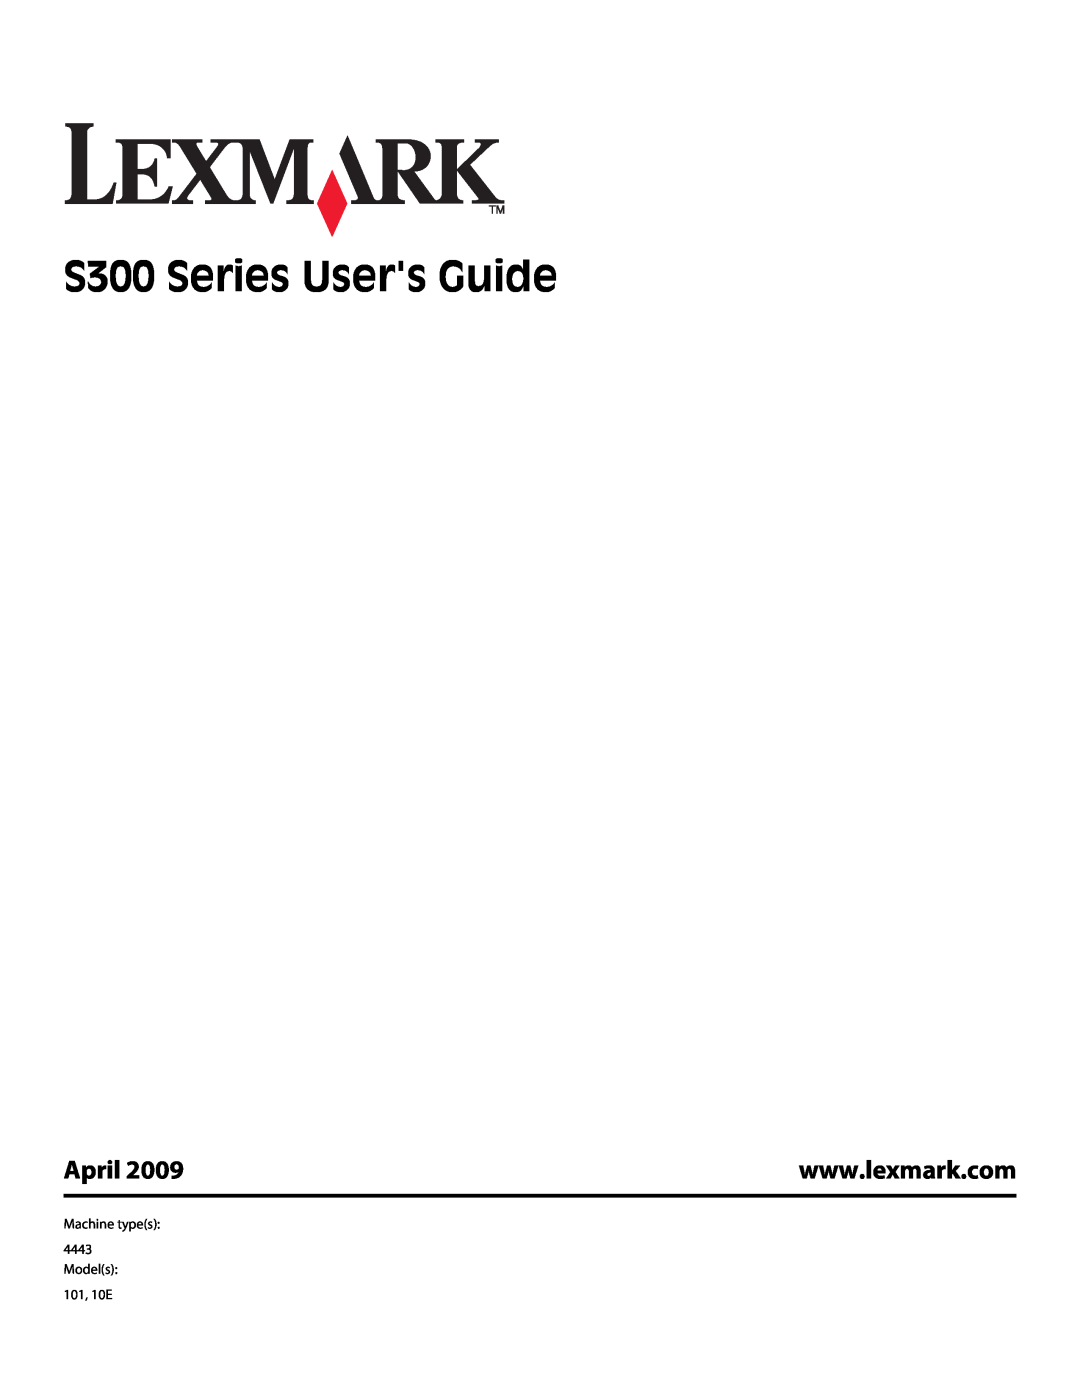 Lexmark manual S300 Series Users Guide, April, Machine types 4443 Models 101, 10E 